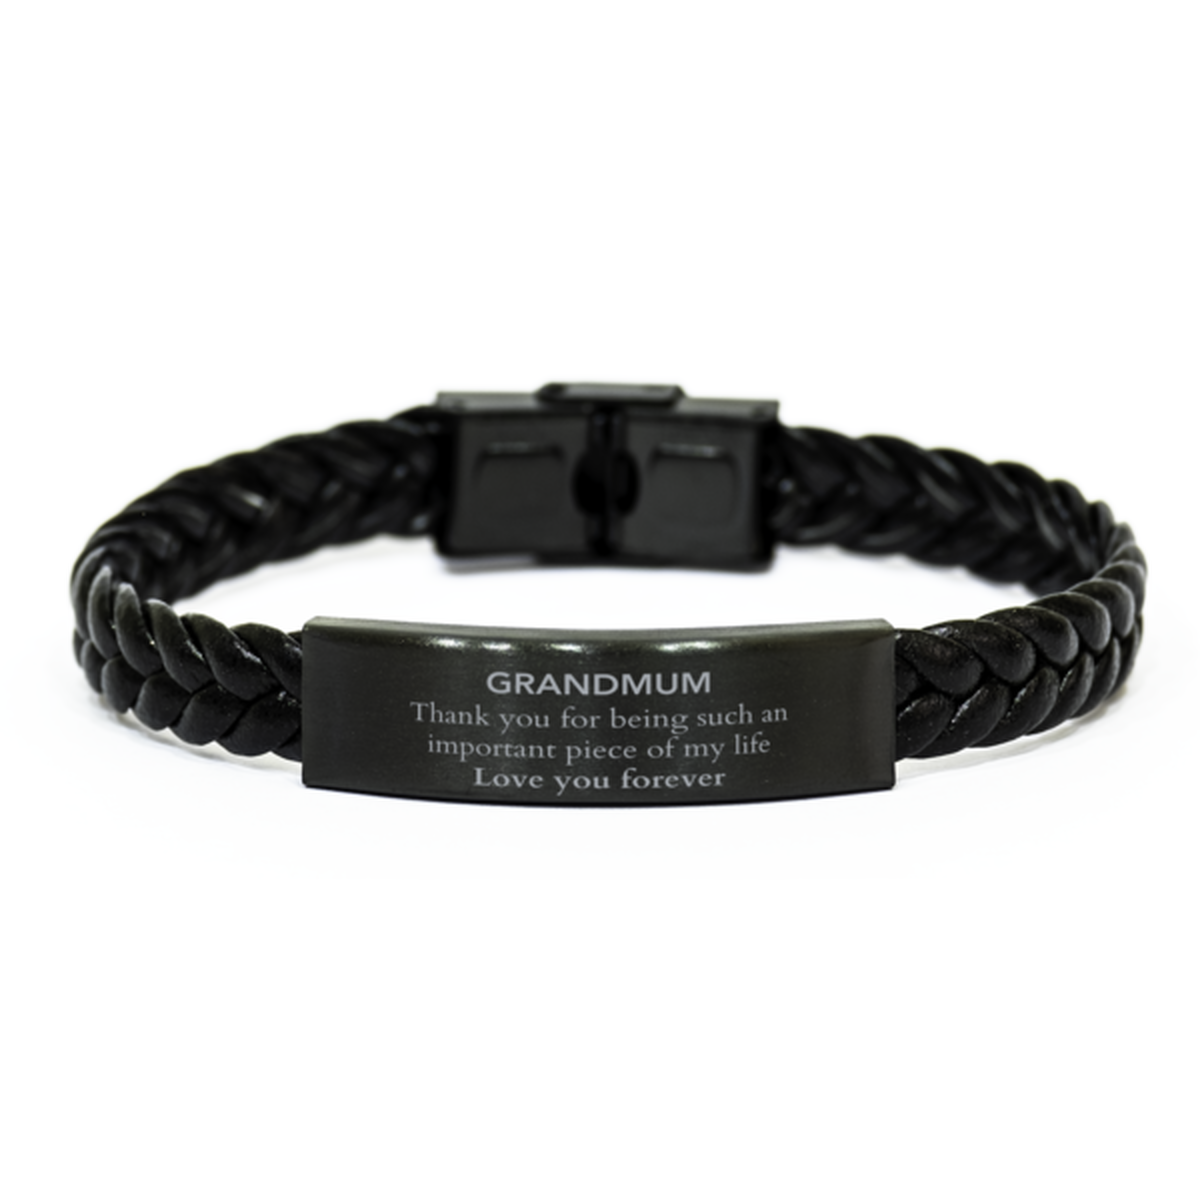 Appropriate Grandmum Braided Leather Bracelet Epic Birthday Gifts for Grandmum Thank you for being such an important piece of my life Grandmum Christmas Mothers Fathers Day